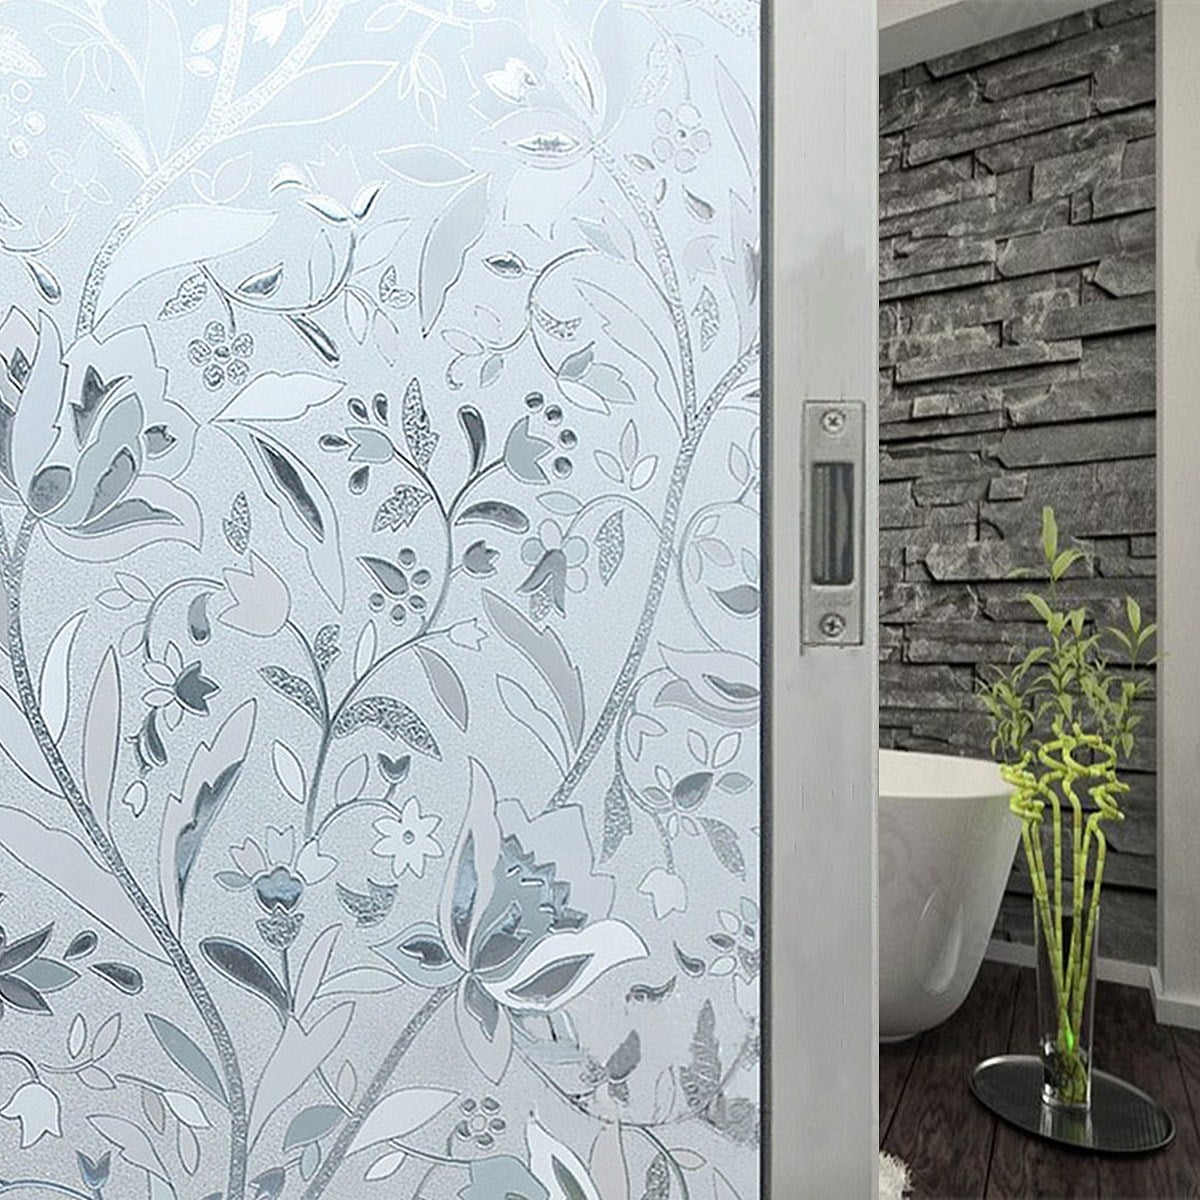 78" Window Frosted Privacy Film Glass Door Stickers Self Adhesive Bathroom Decor 